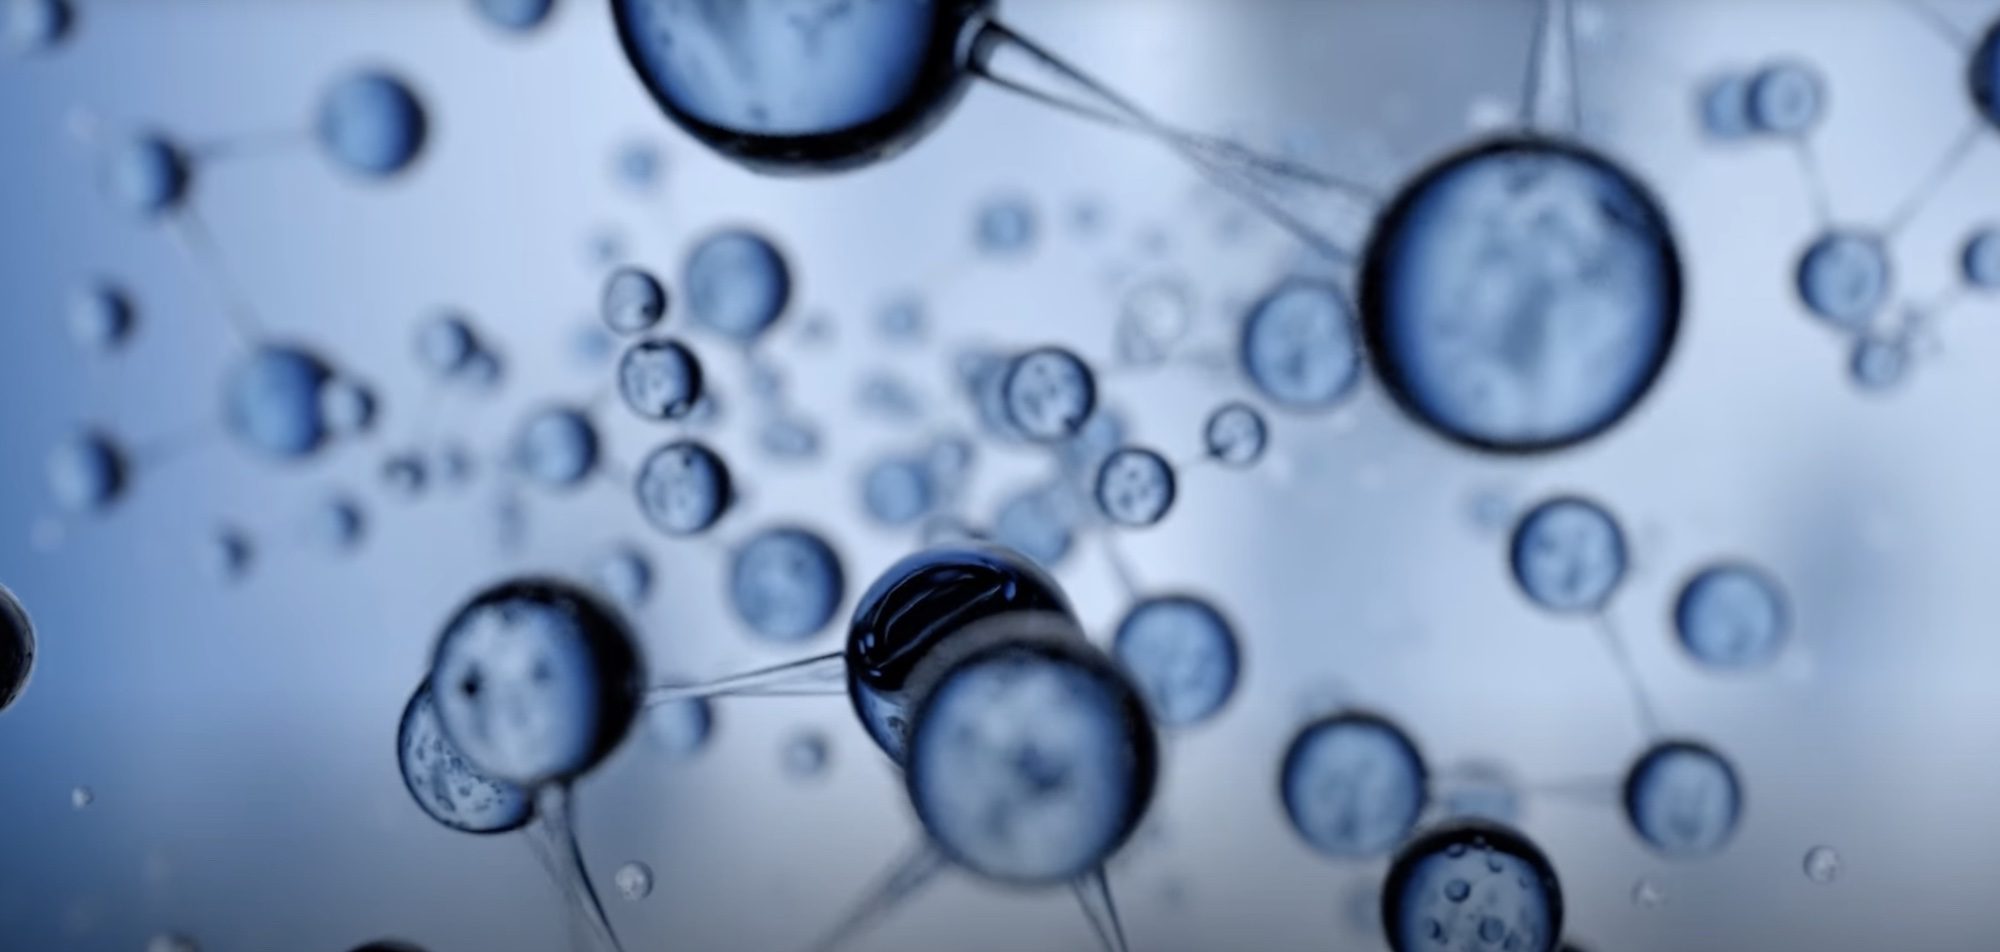 Hydrogen bubbles. Media sourced from Youtube.